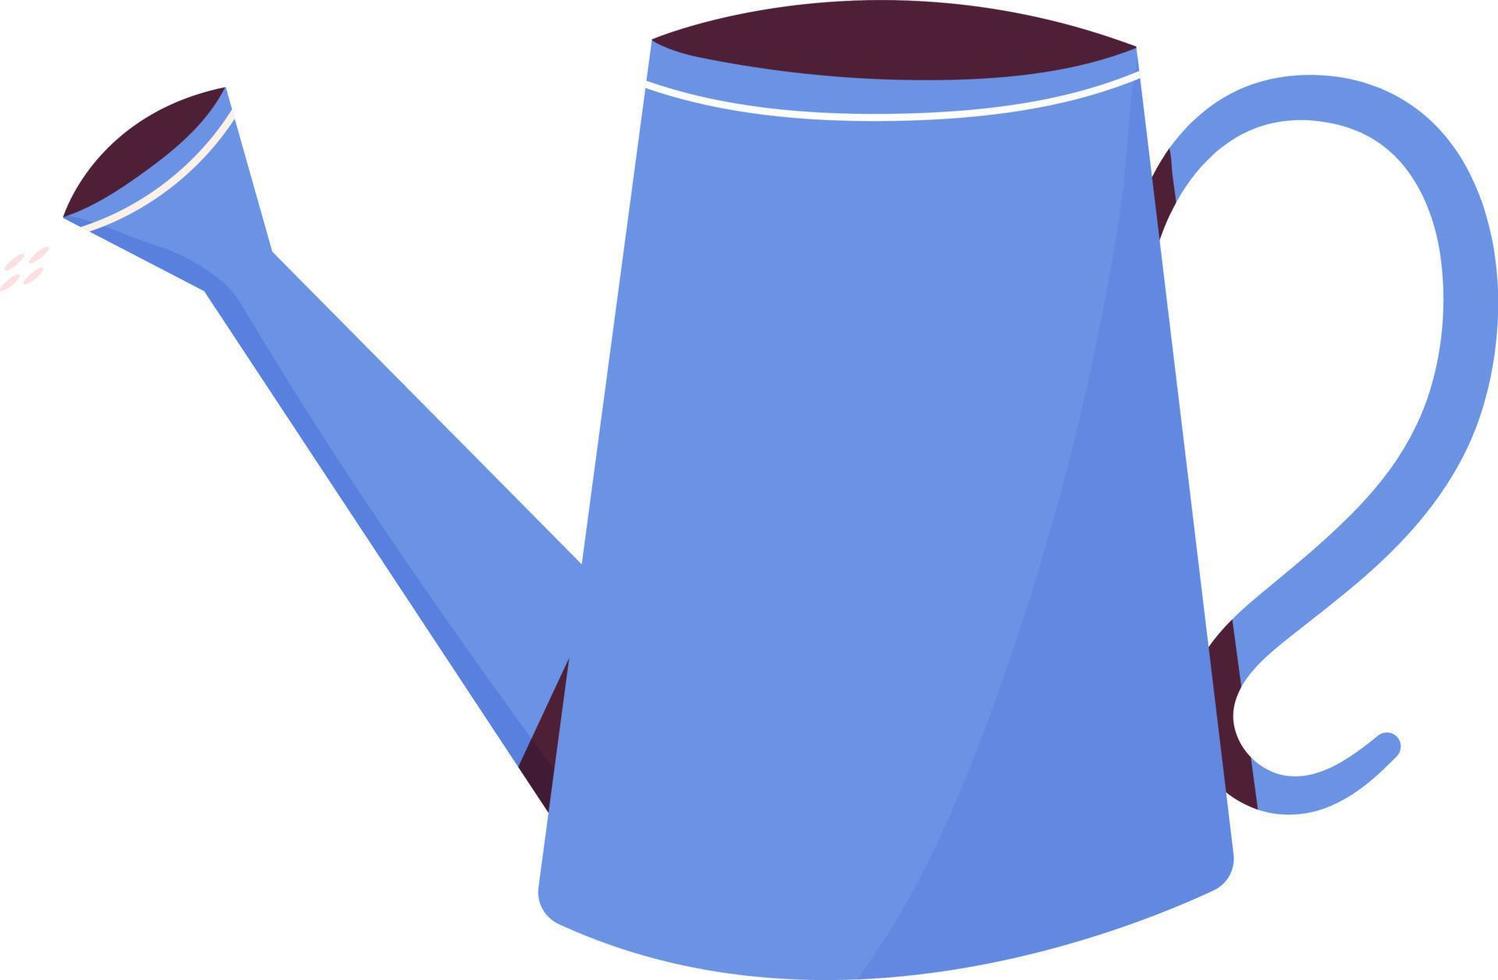 Watering can blue for watering plants. vector